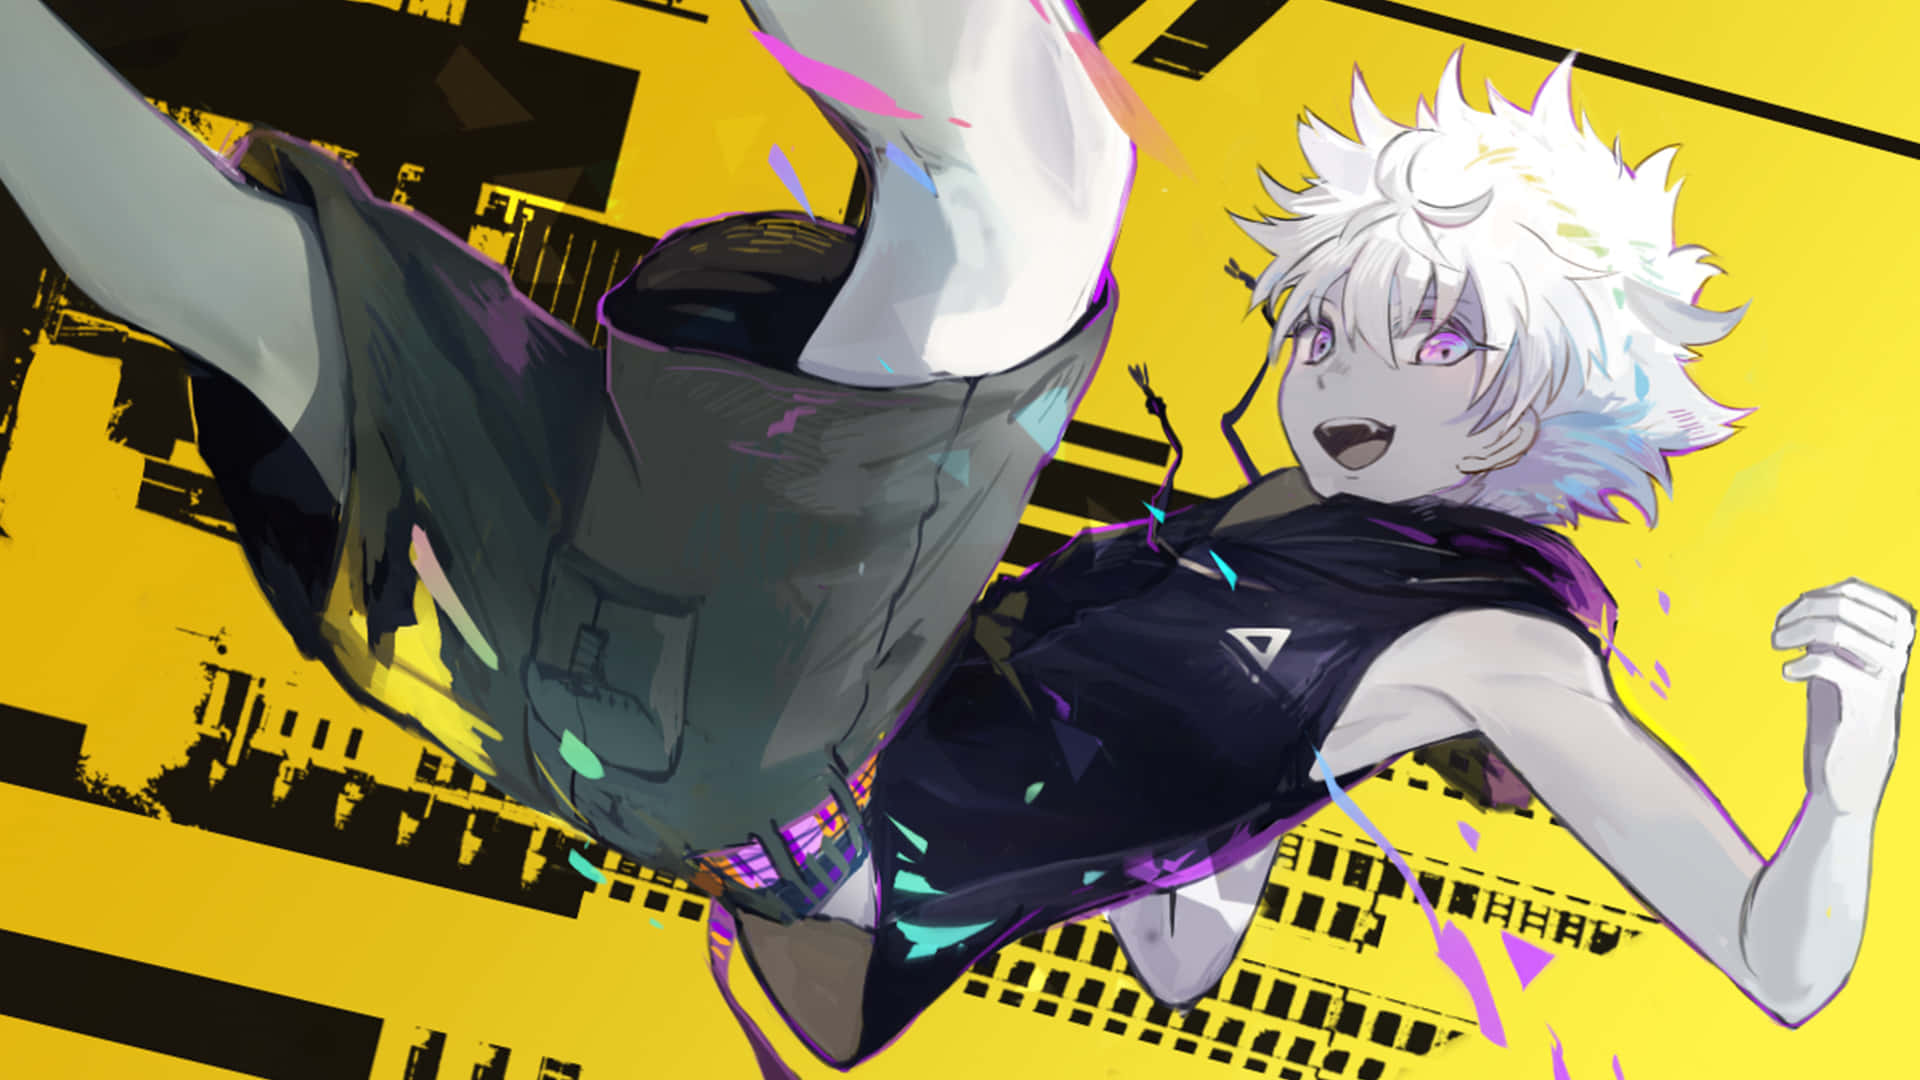 "No matter the odds, Killua never backs down from a challenge!"